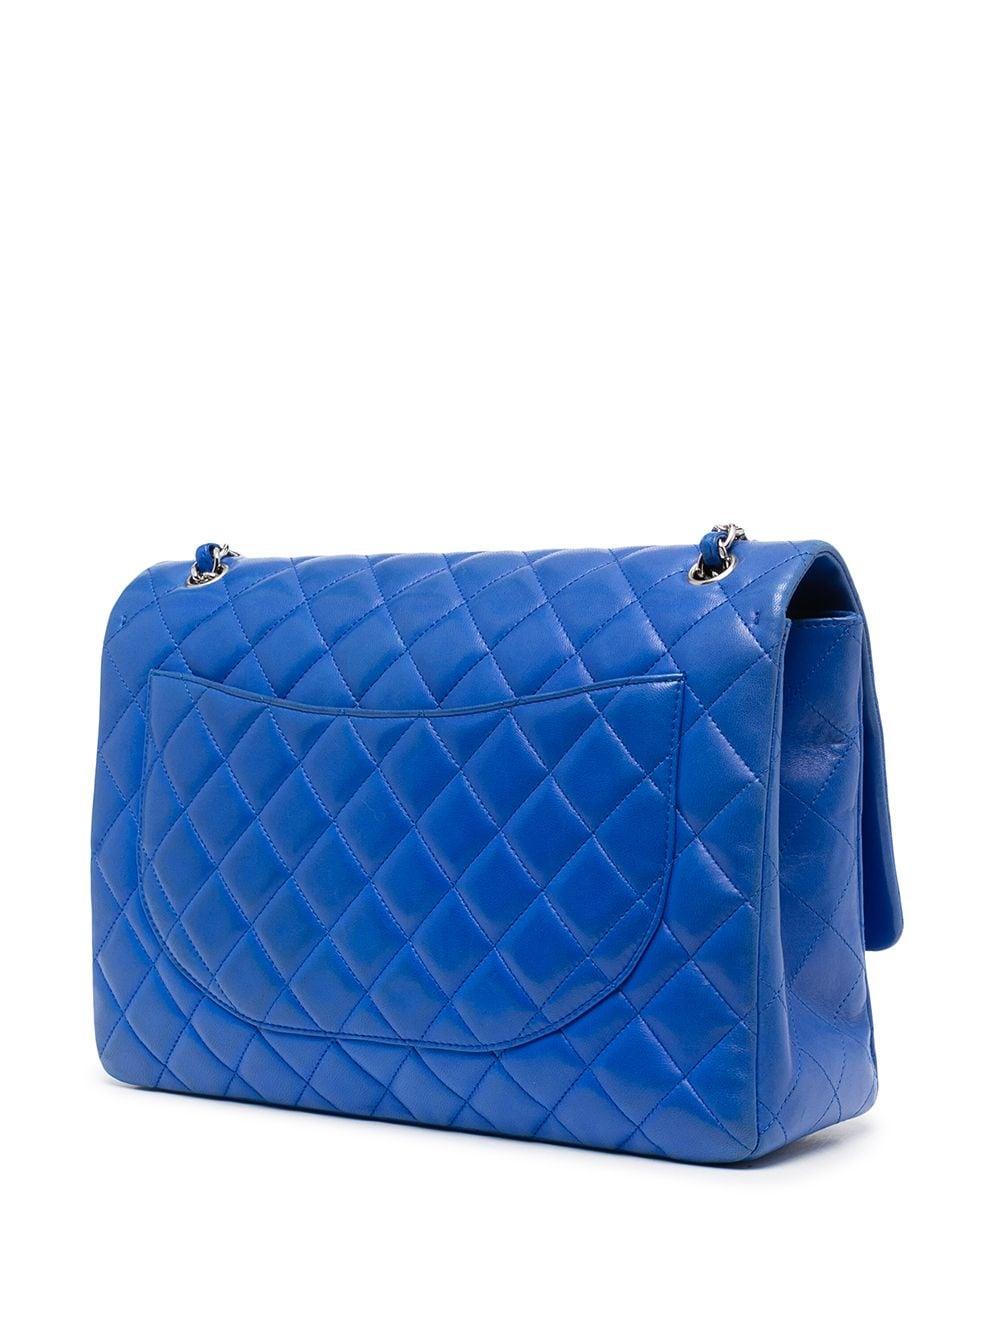 Chanel Blue Maxi Flap Bag In Excellent Condition In London, GB